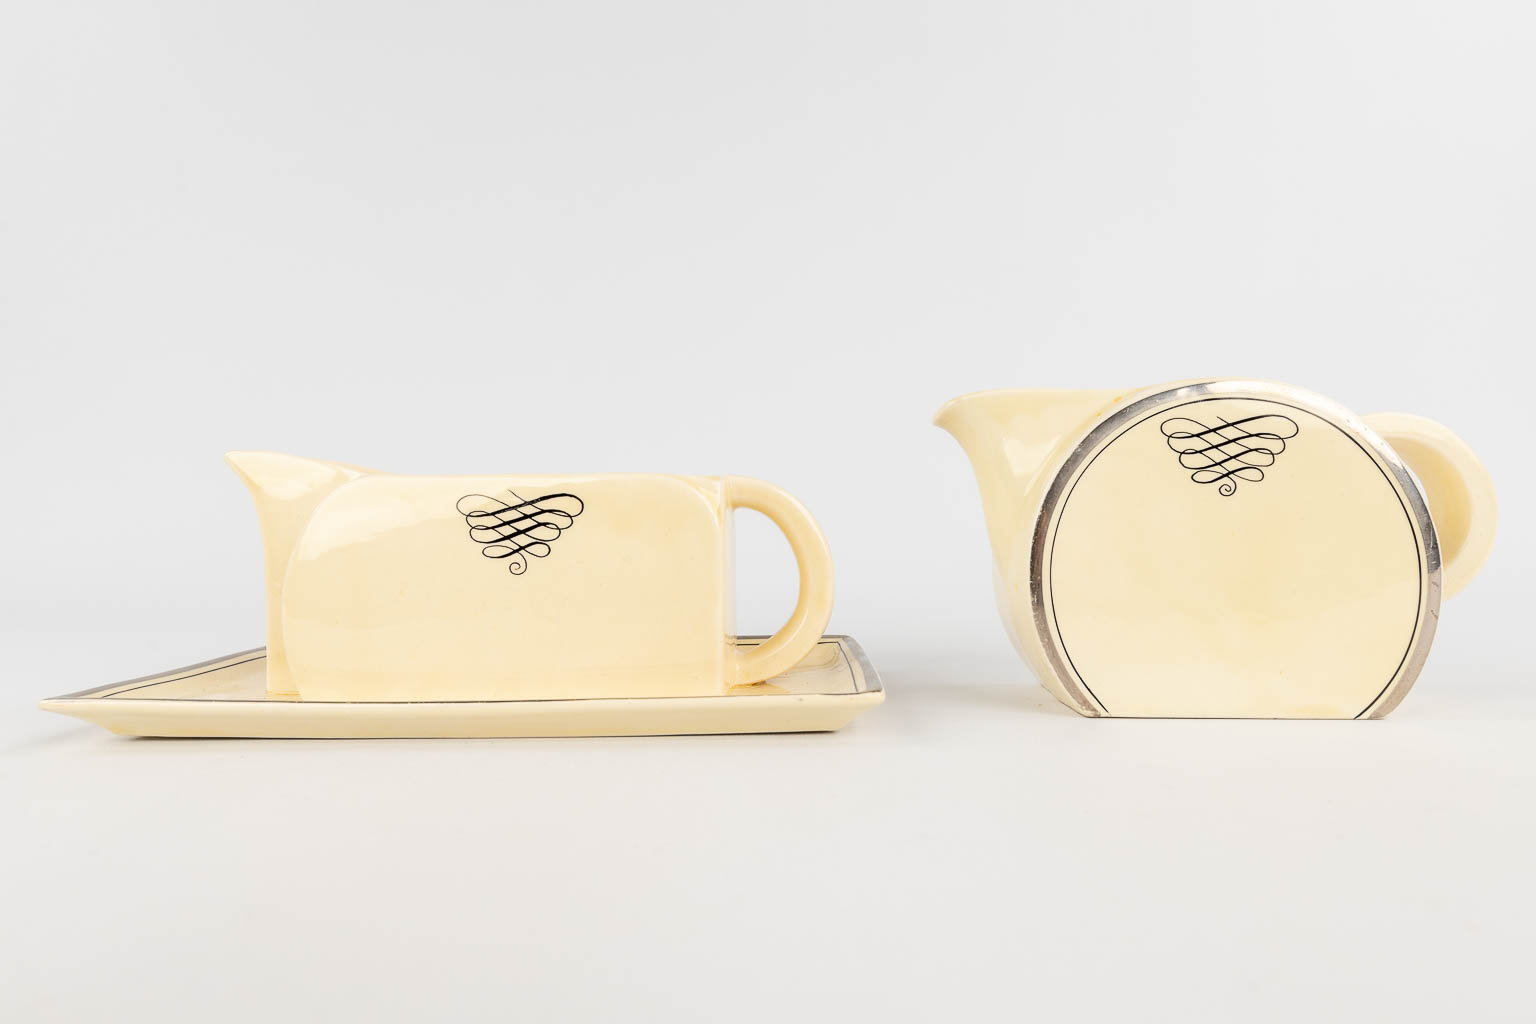 Clarice CLIFF (1899-1972) for Royal Staffordshire, a set of 5 faience items. (L: 27 x W: 40 cm)